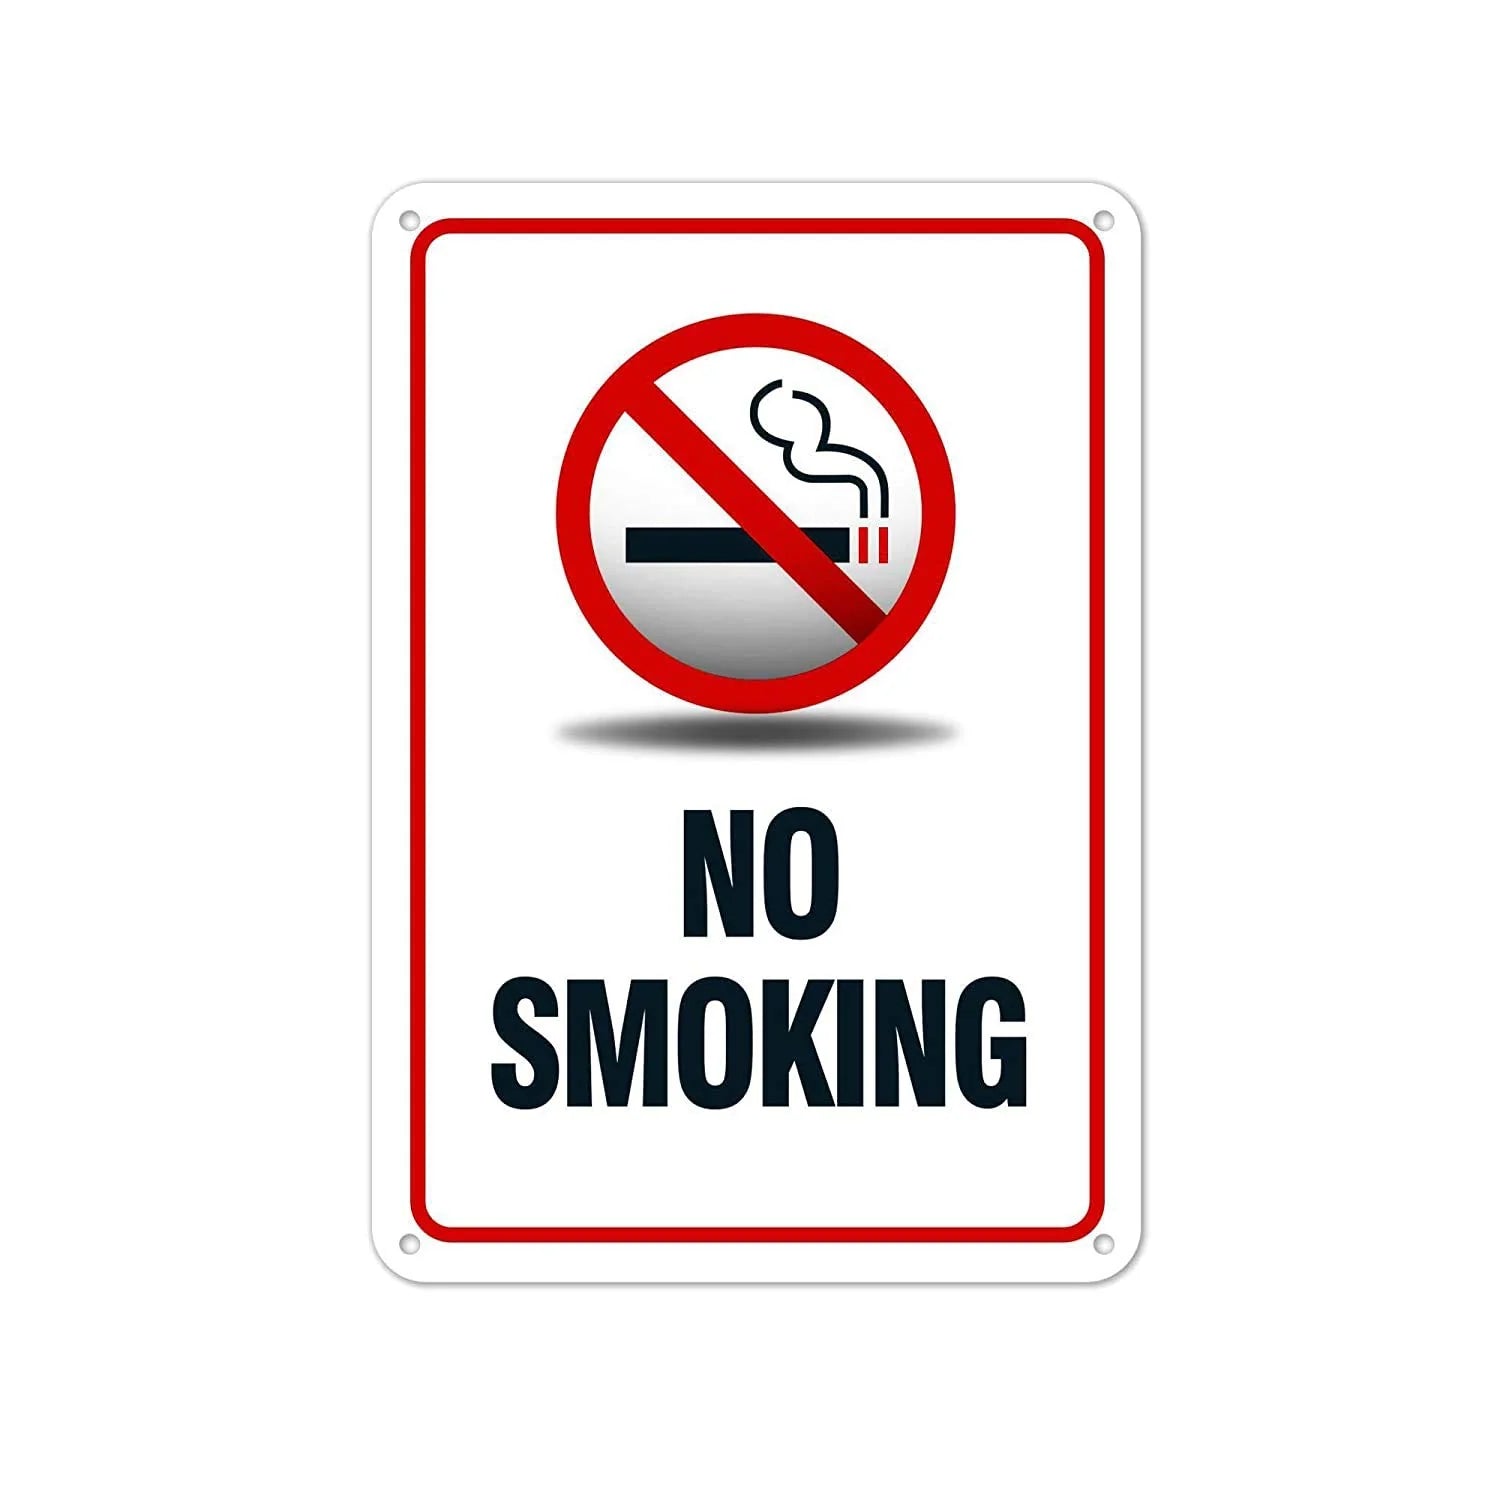 Clearing the Air: The Perils of Smoking and the Power of No Smoking Signs